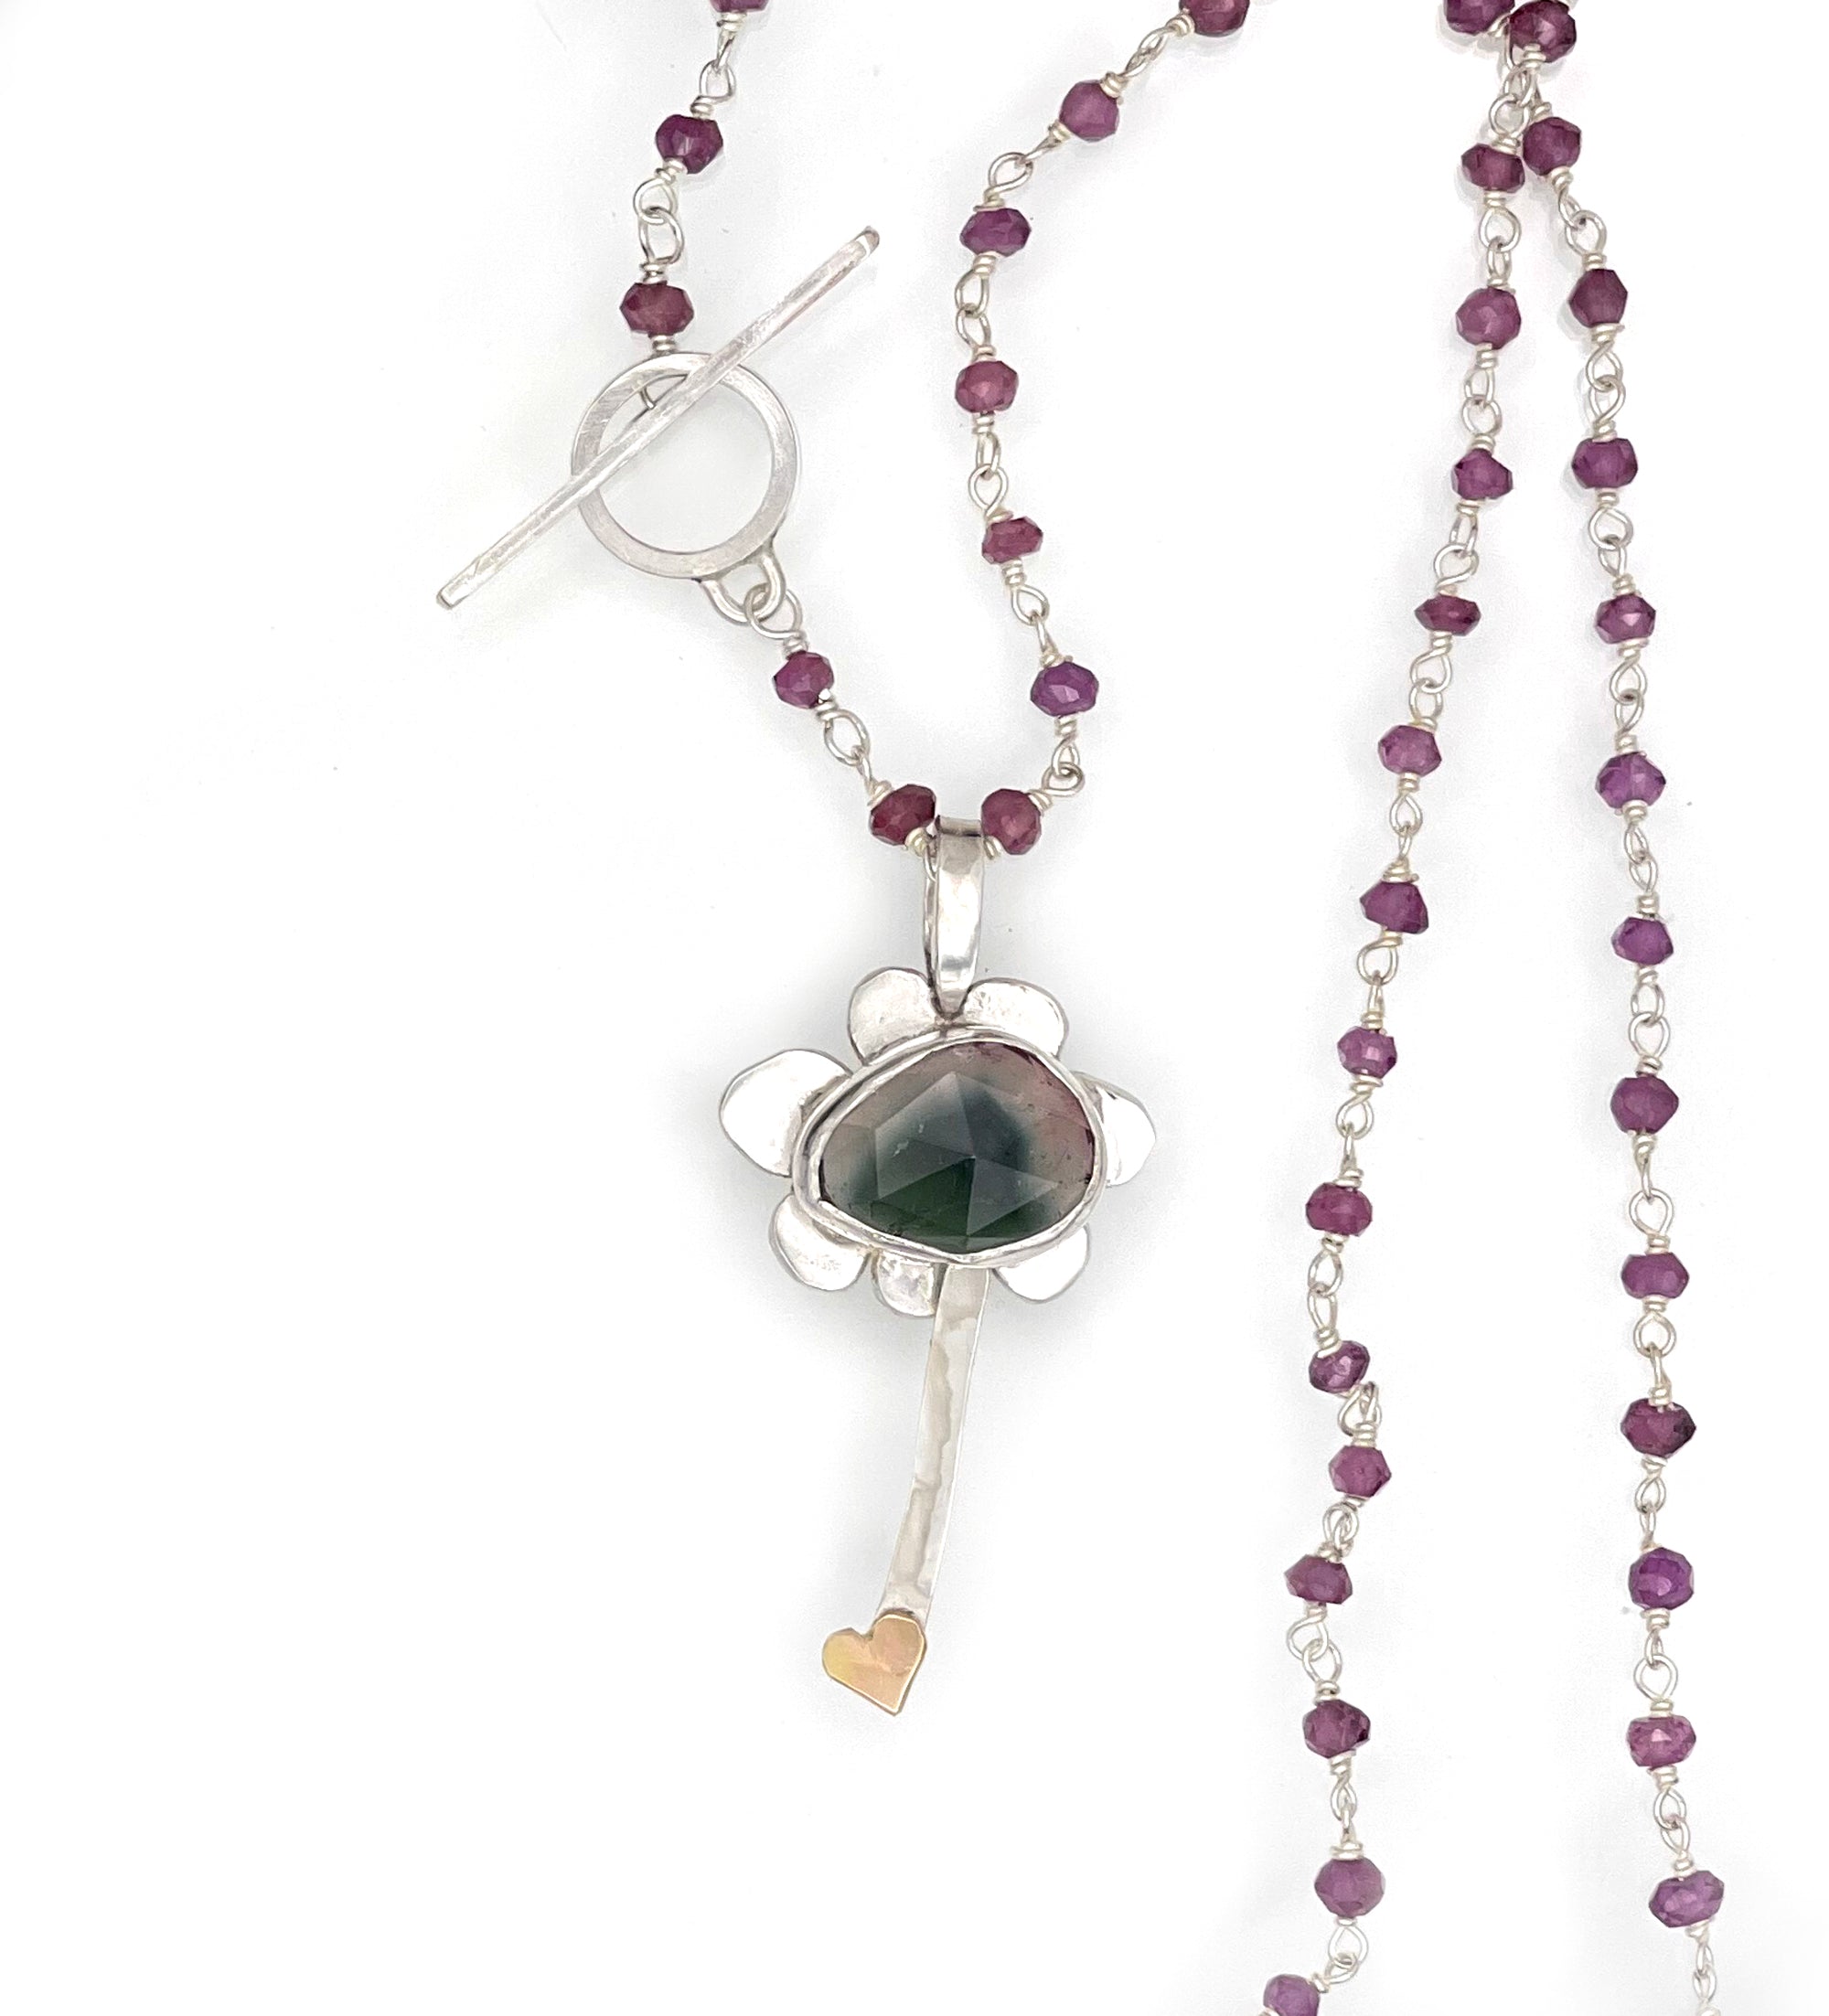 Tourmaline Flower Necklace with Garnet Chain and Toggle, One of a kind